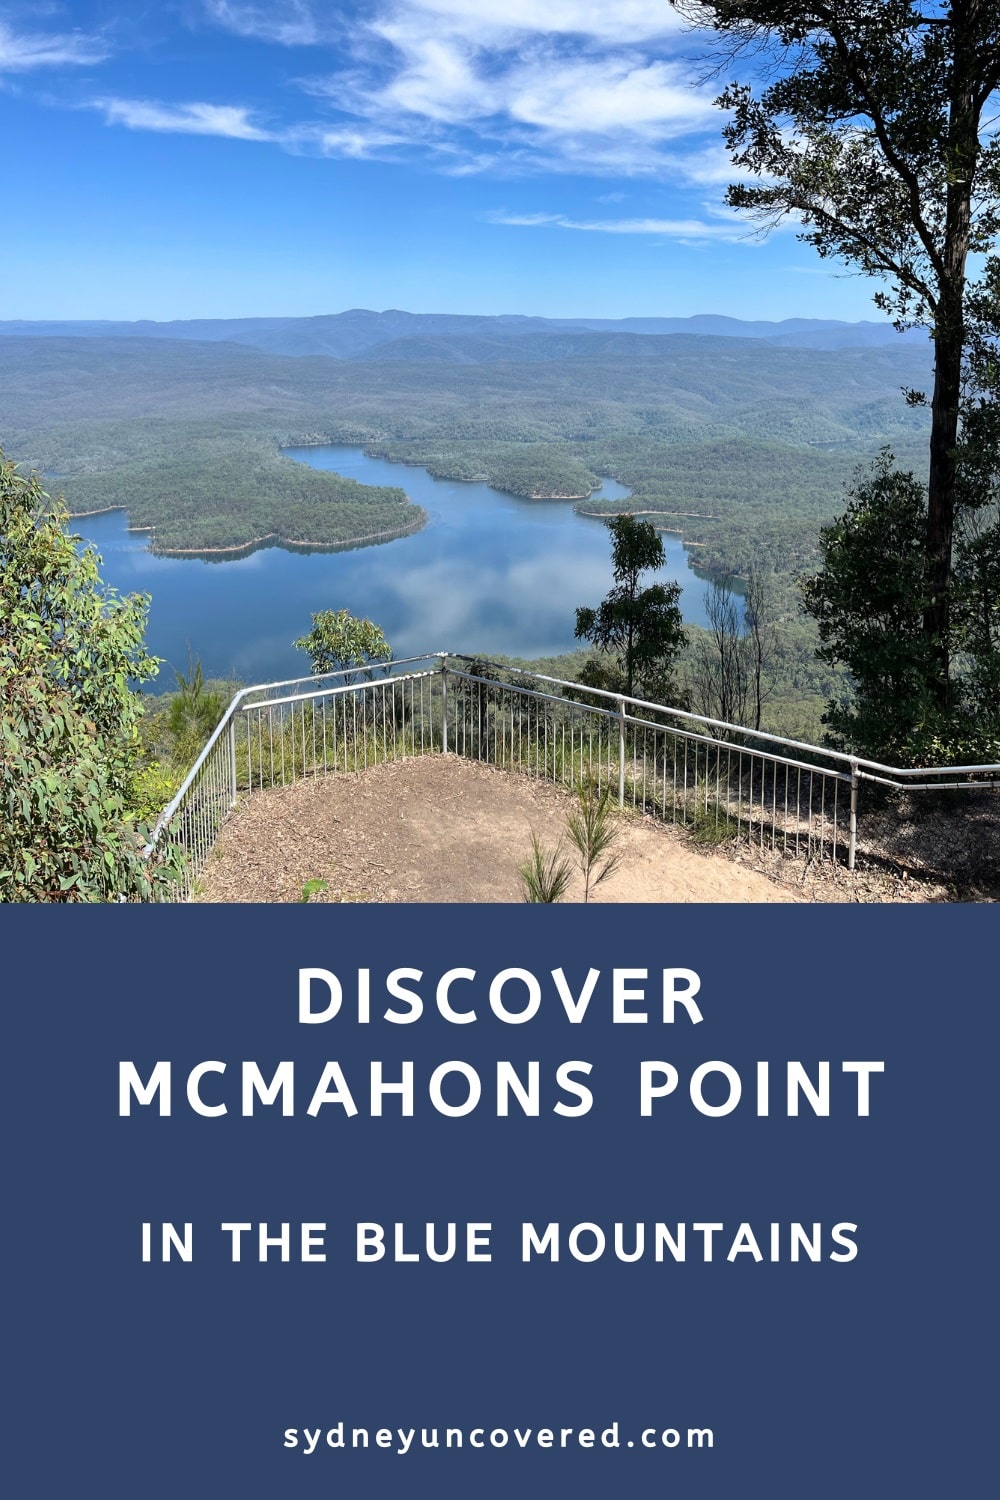 Discover McMahons Point in the Blue Mountains